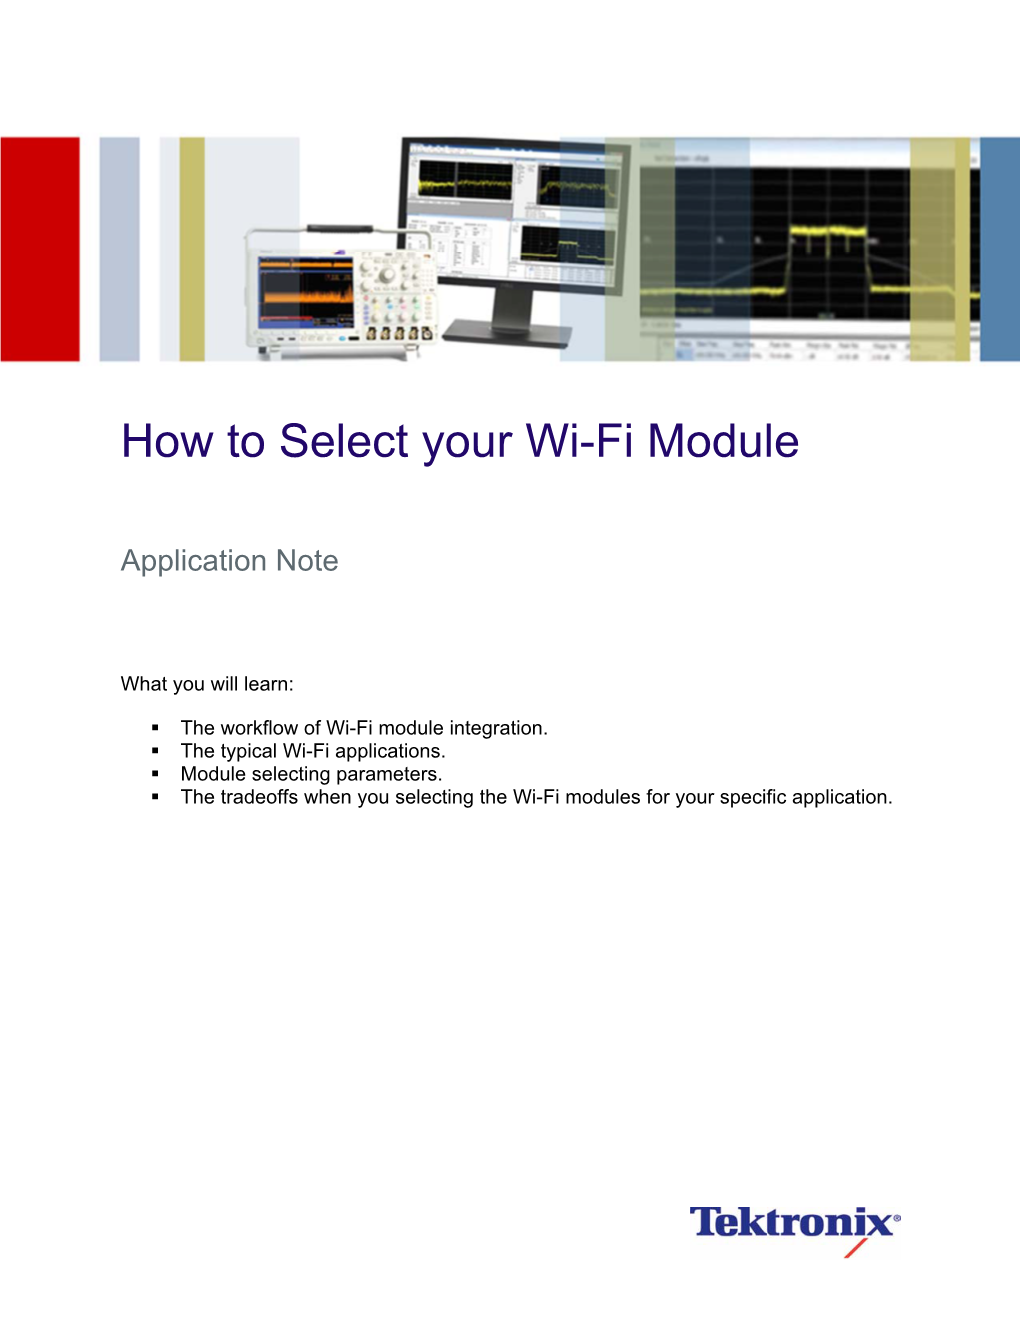 How to Select Your Wi-Fi Module